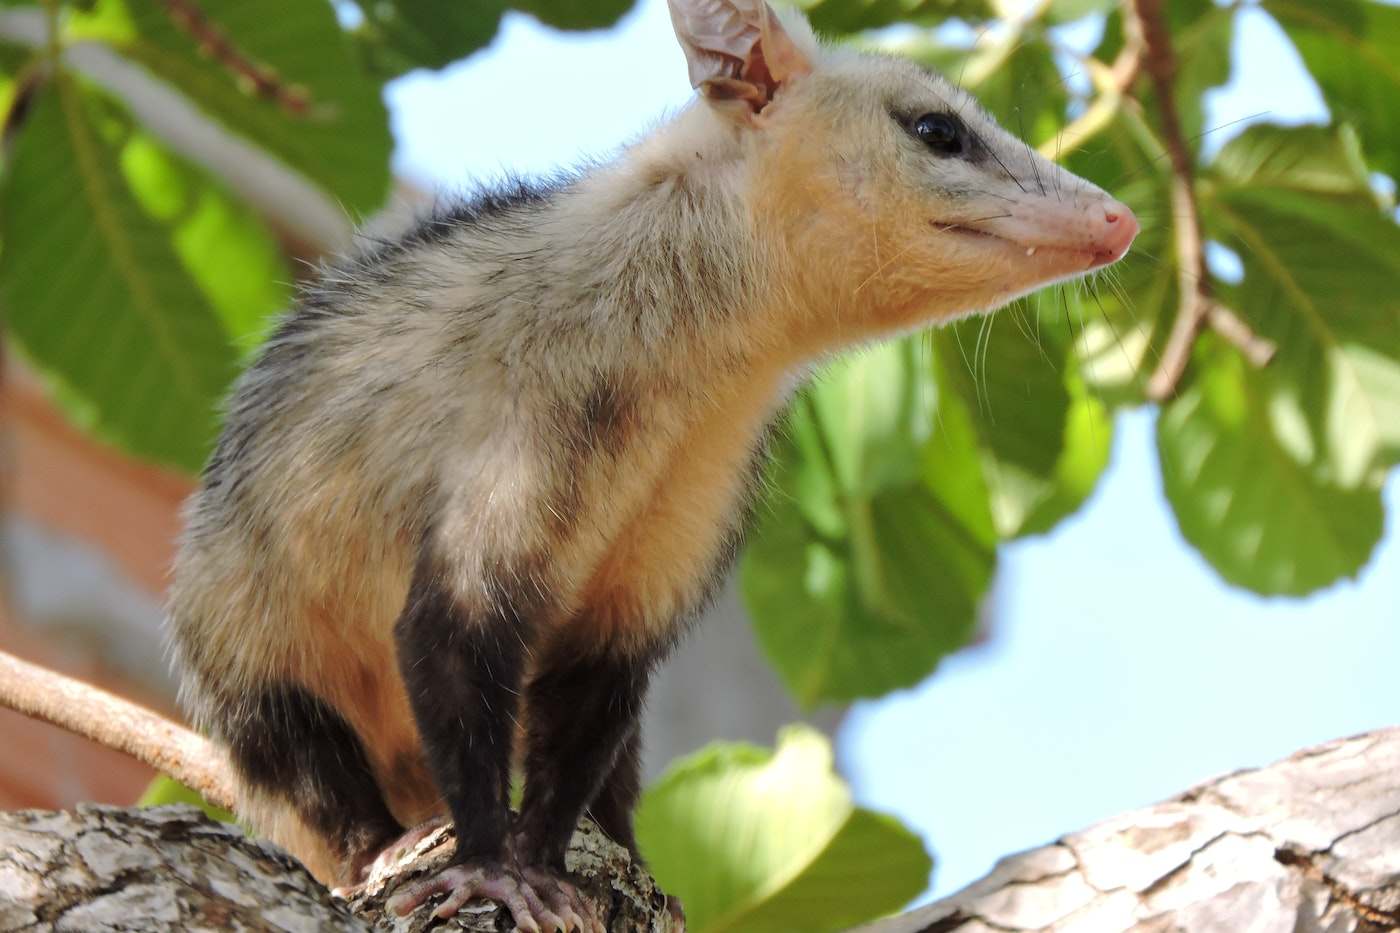 opossum in tree - are opossums endangered